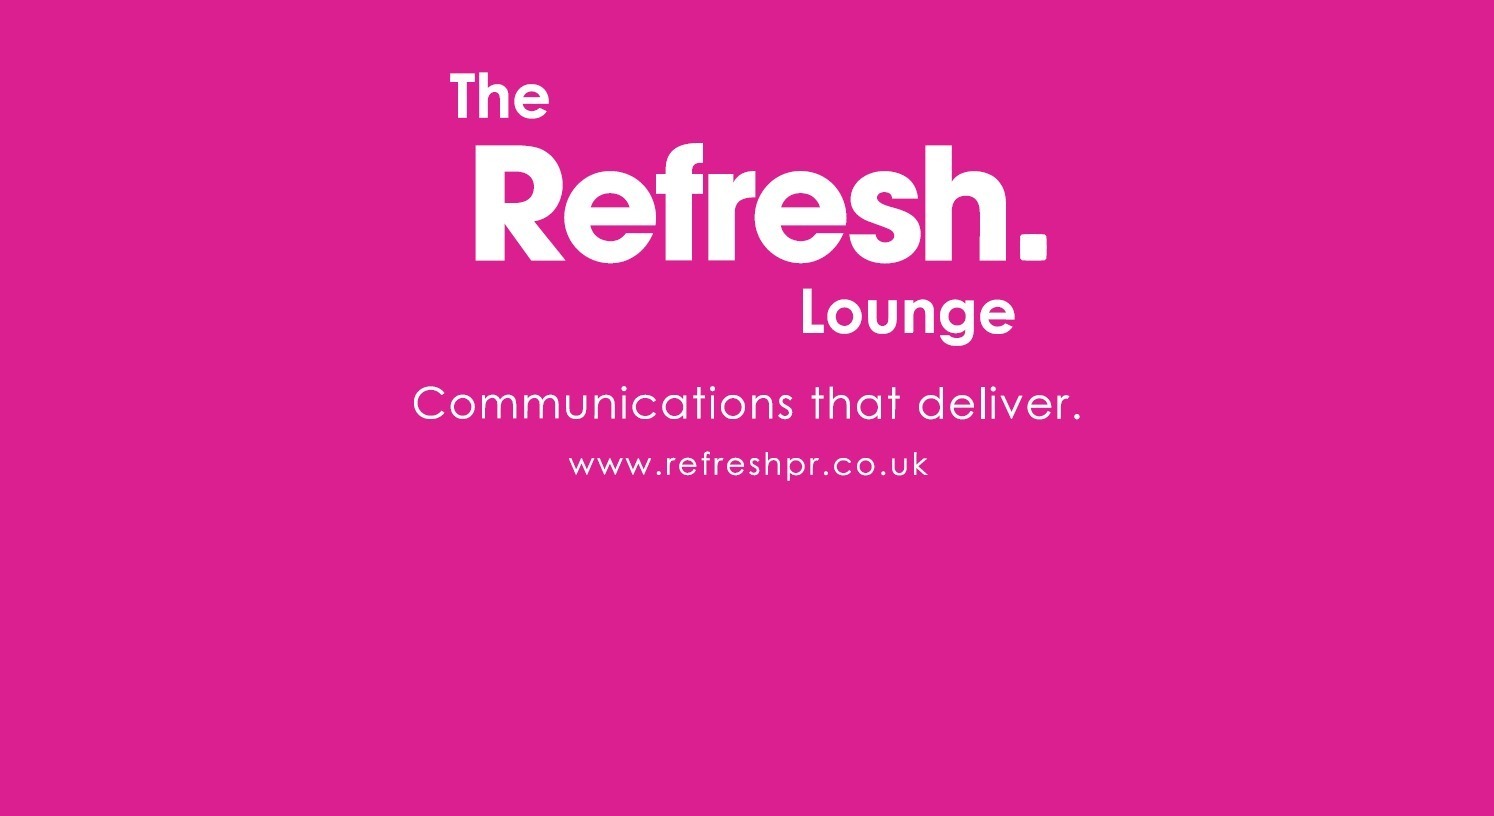 The Refresh lounge